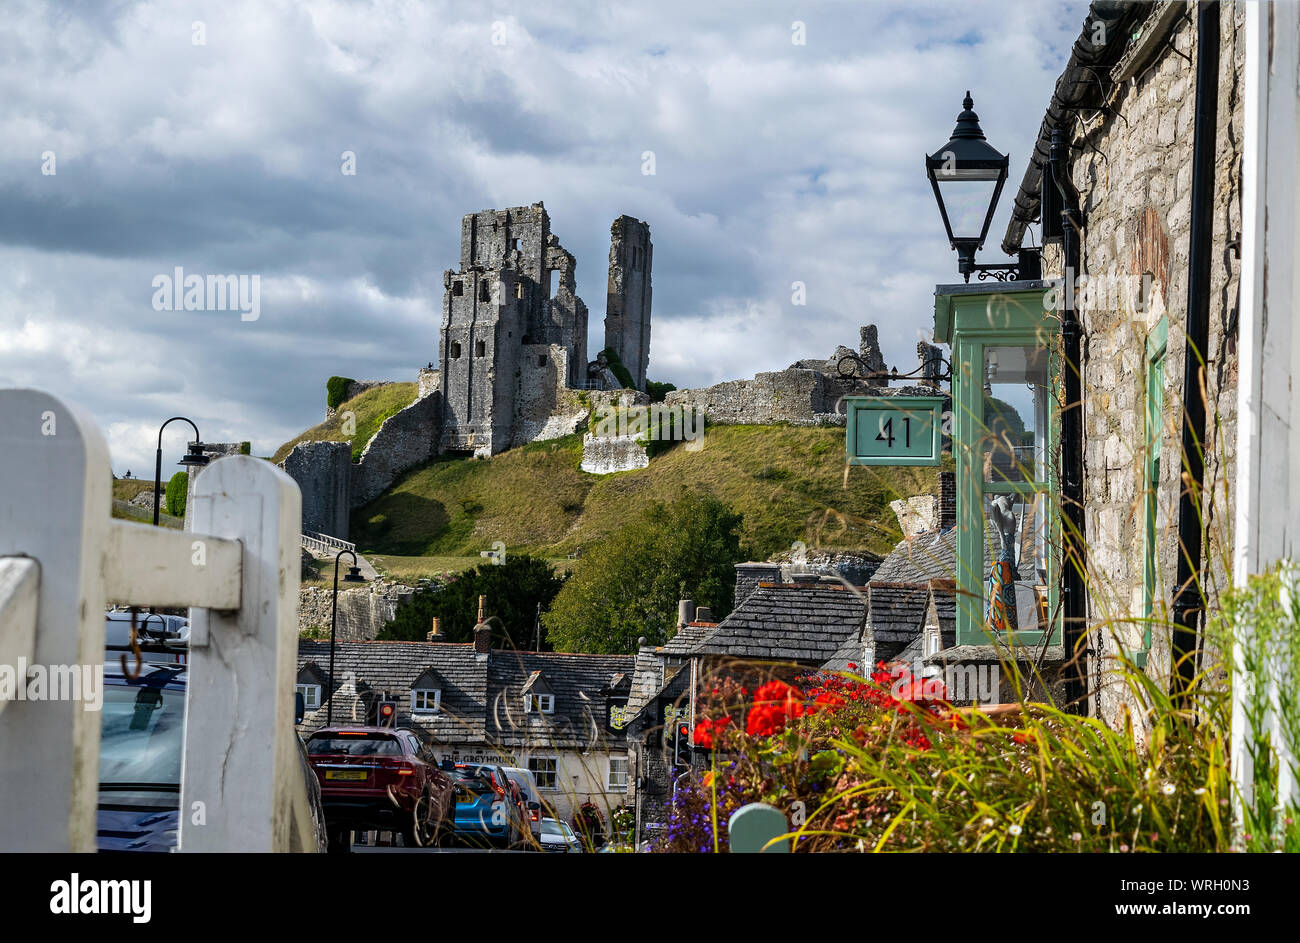 The historic village of Corfe, Dorset, England, UK . The ruined Castle  stands on the Purbeck hills overlooking the village Stock Photo